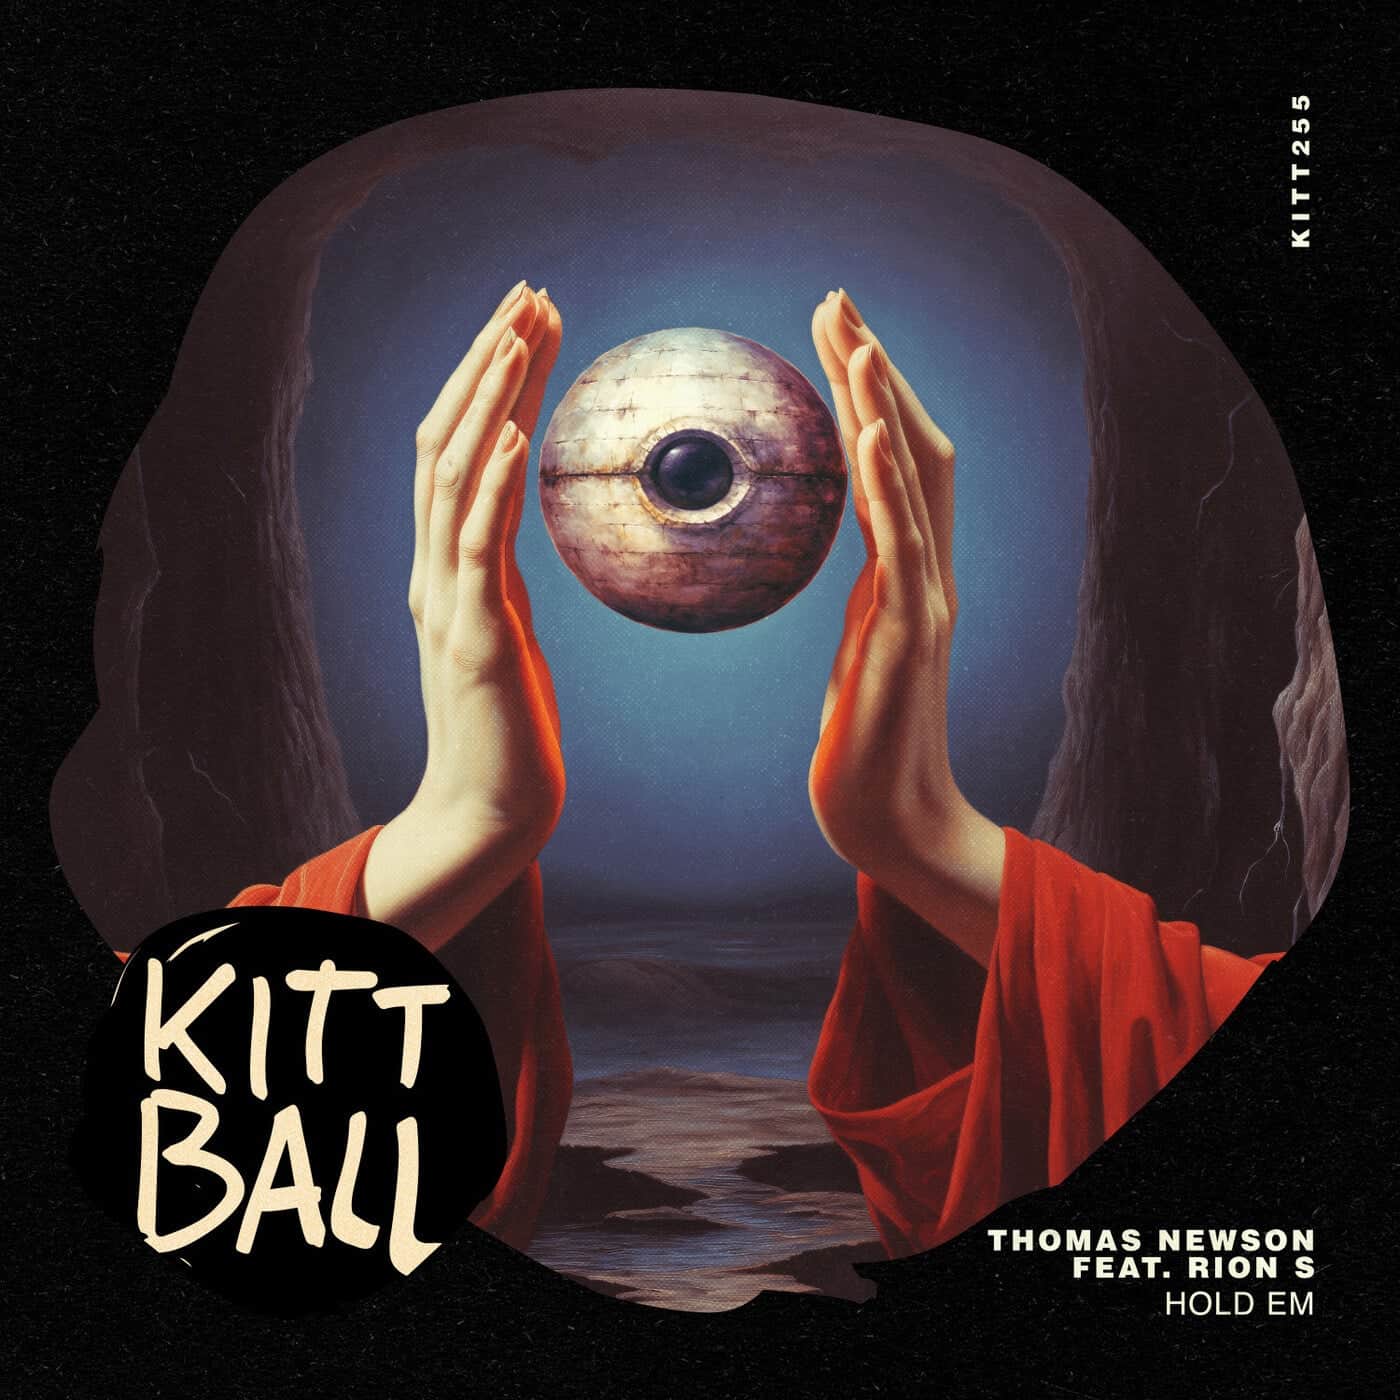 image cover: Thomas Newson - Hold Em Feat. Rion S on Kittball